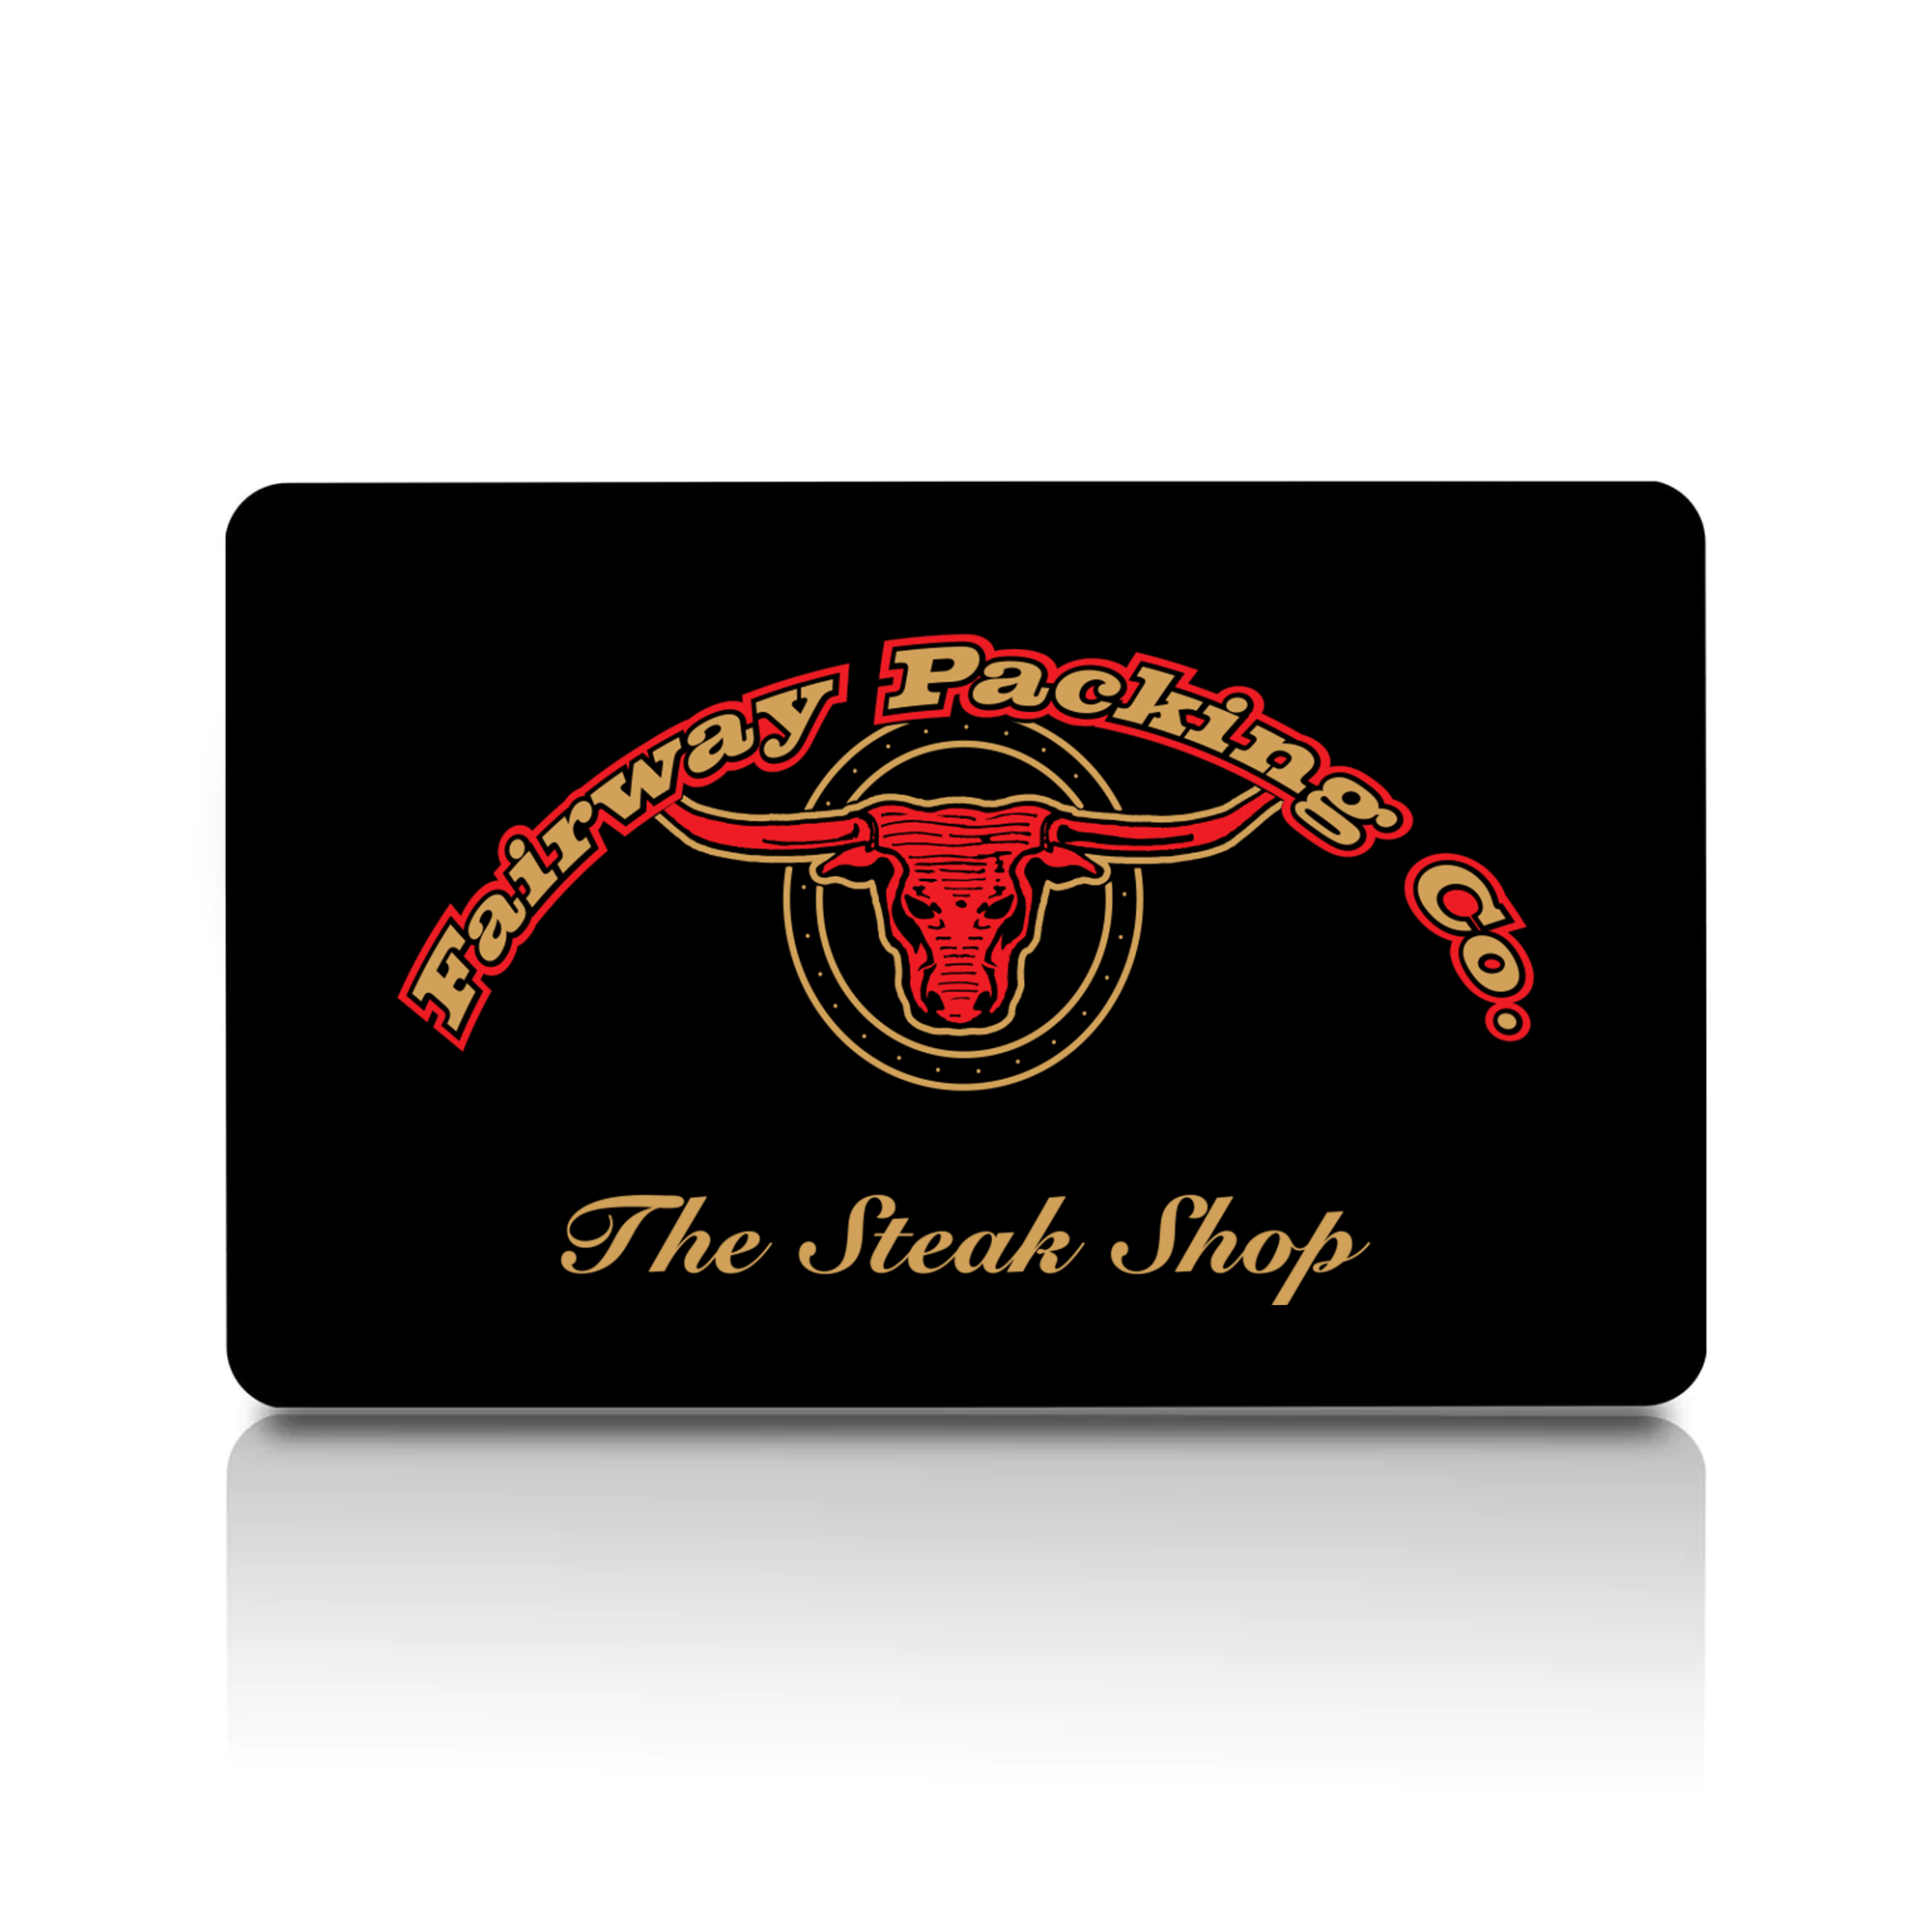 The Steak Shop by Fairway Packing